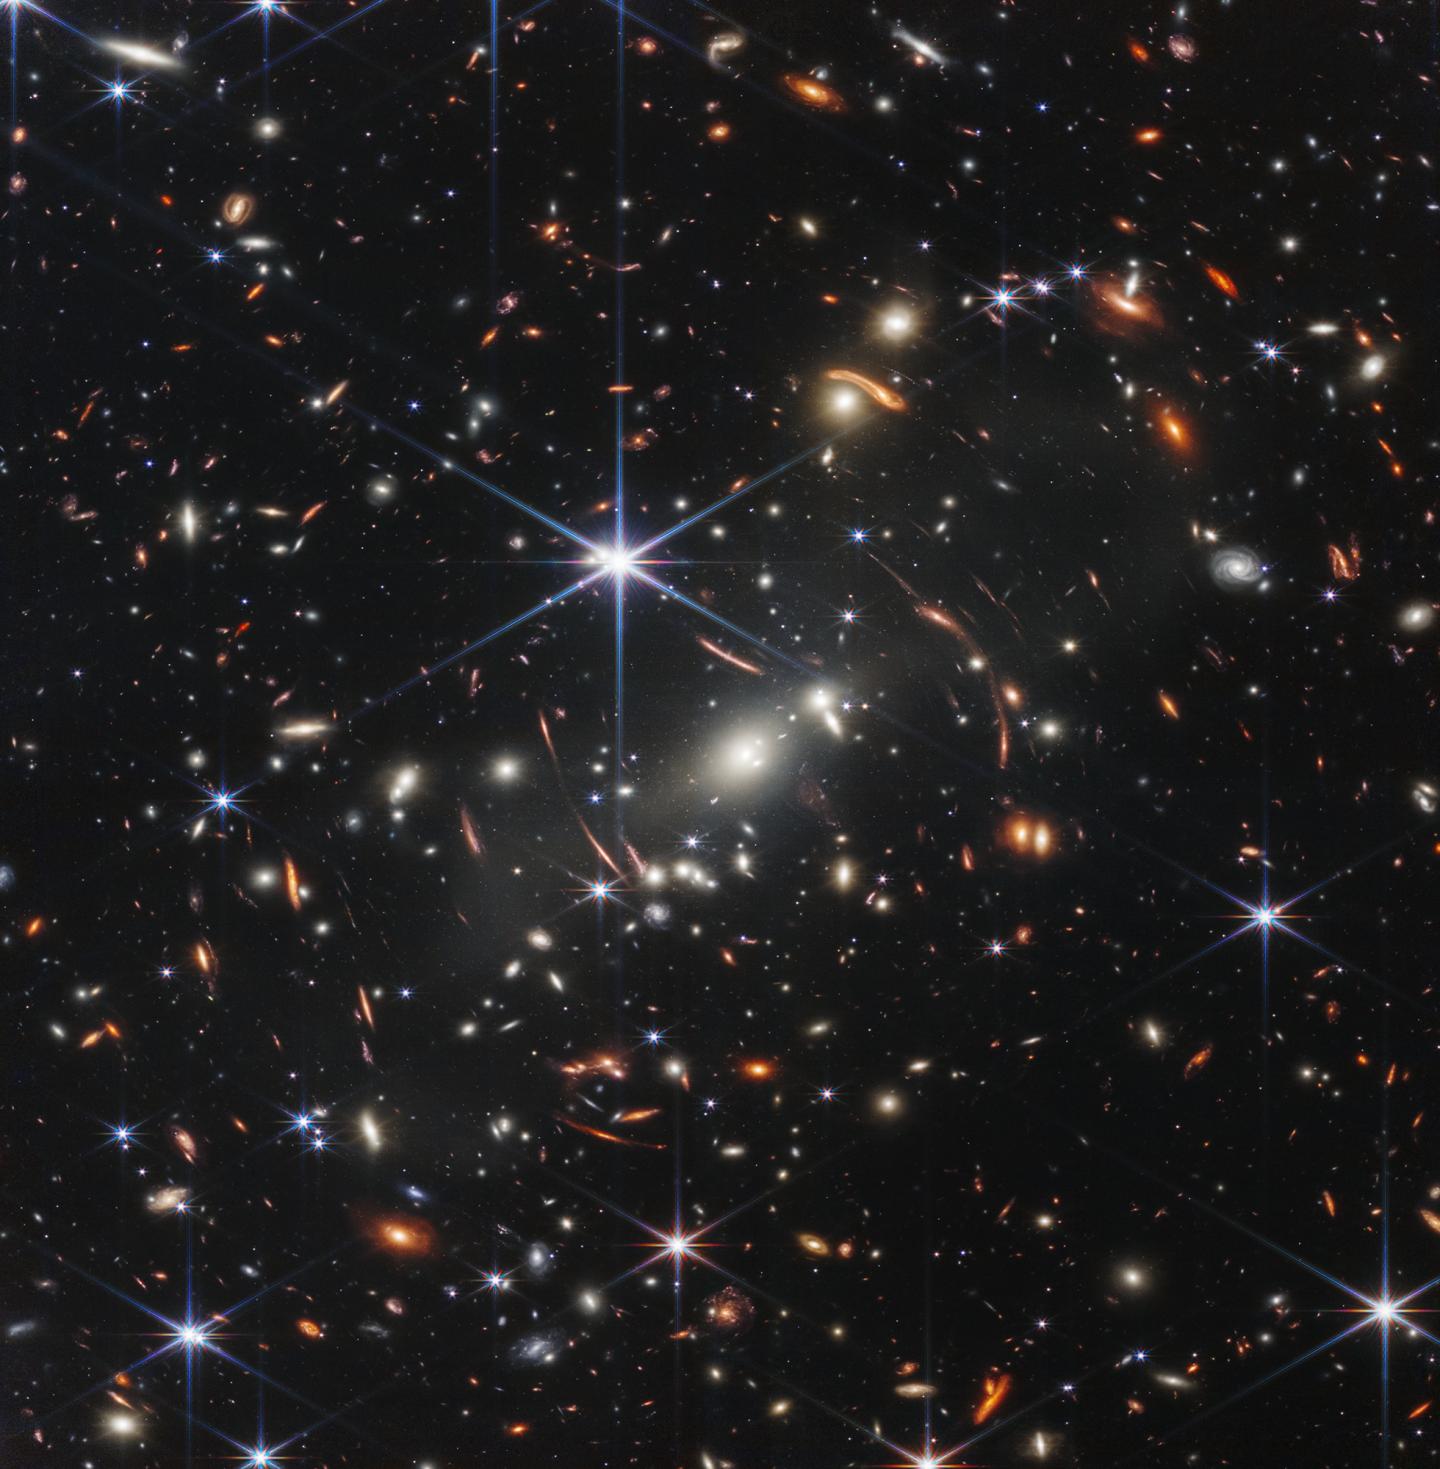 Thousands of small galaxies appear across this view. Their colors vary. Some are shades of orange, while others are white. Most appear as fuzzy ovals, but a few have distinct spiral arms. In front of the galaxies are several foreground stars. Most appear blue, and the bright stars have diffraction spikes, forming an eight-pointed star shape. There are also many thin, long, orange arcs that curve around the center of the image